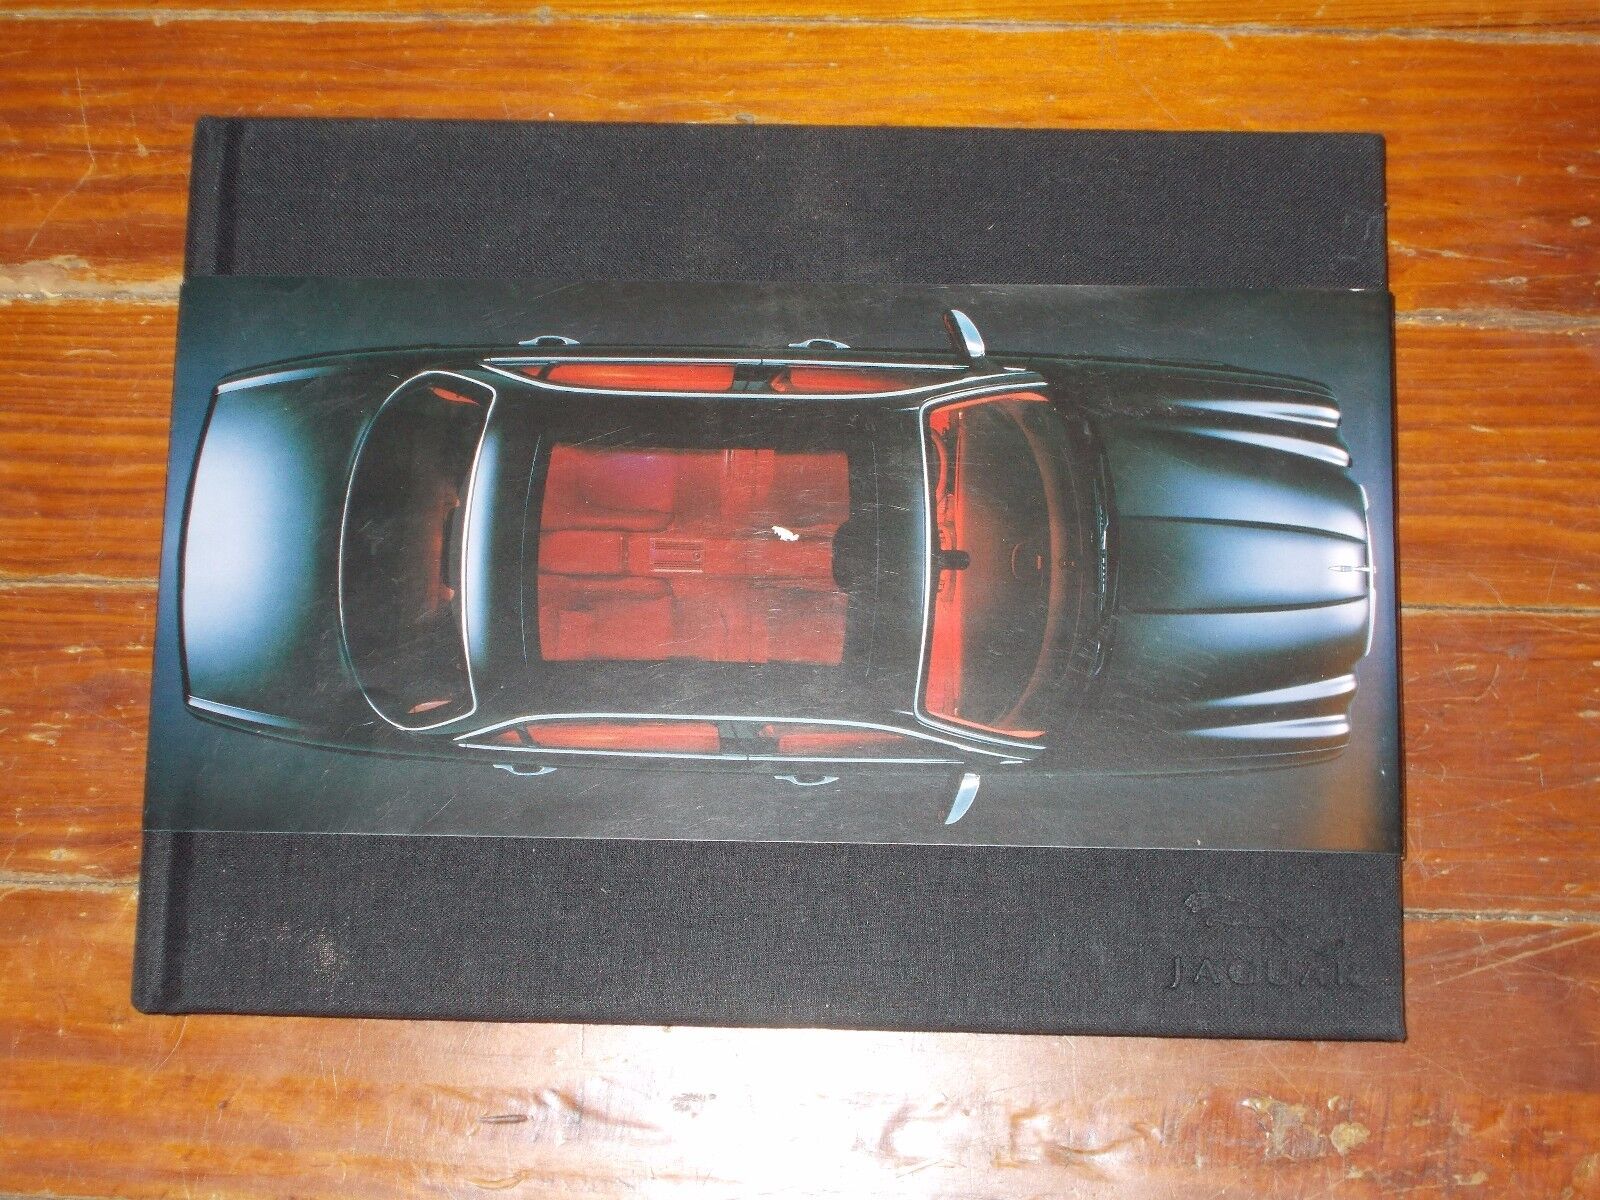 JAGUAR CONCEPT 8 CONCEPT EIGHT MODEL INTRO PRESS KIT BOOK WITH CD-ROM NICE